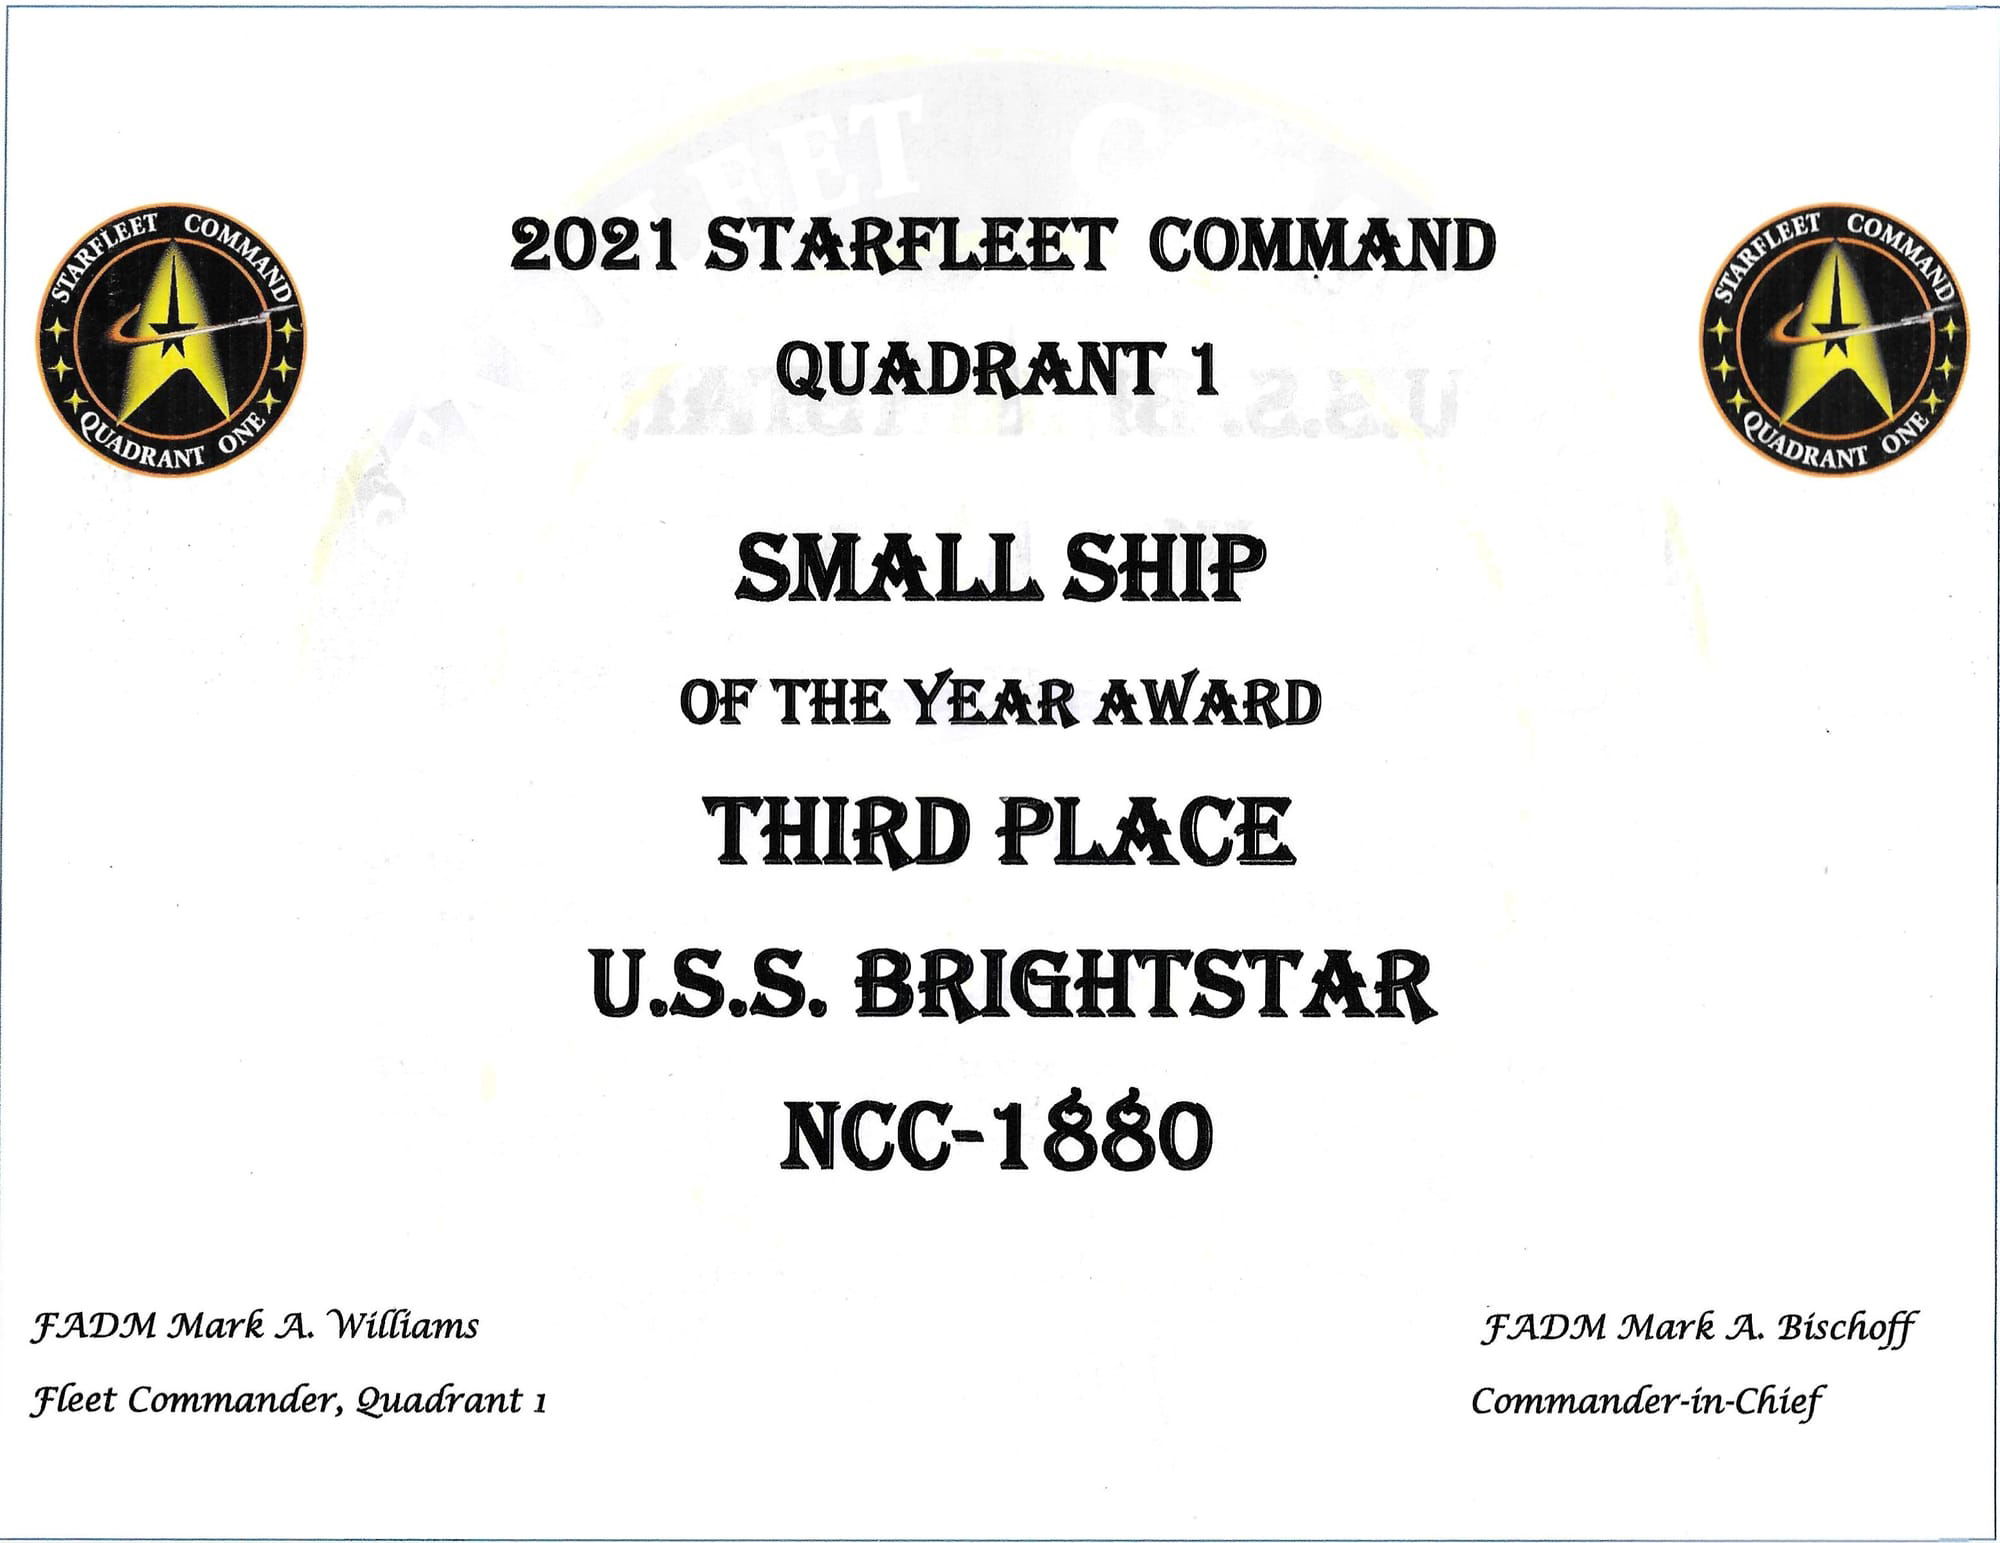 'SMALL SHIP OF THE YEAR' Third Place (STARFLEET COMMAND AWARD) 2021